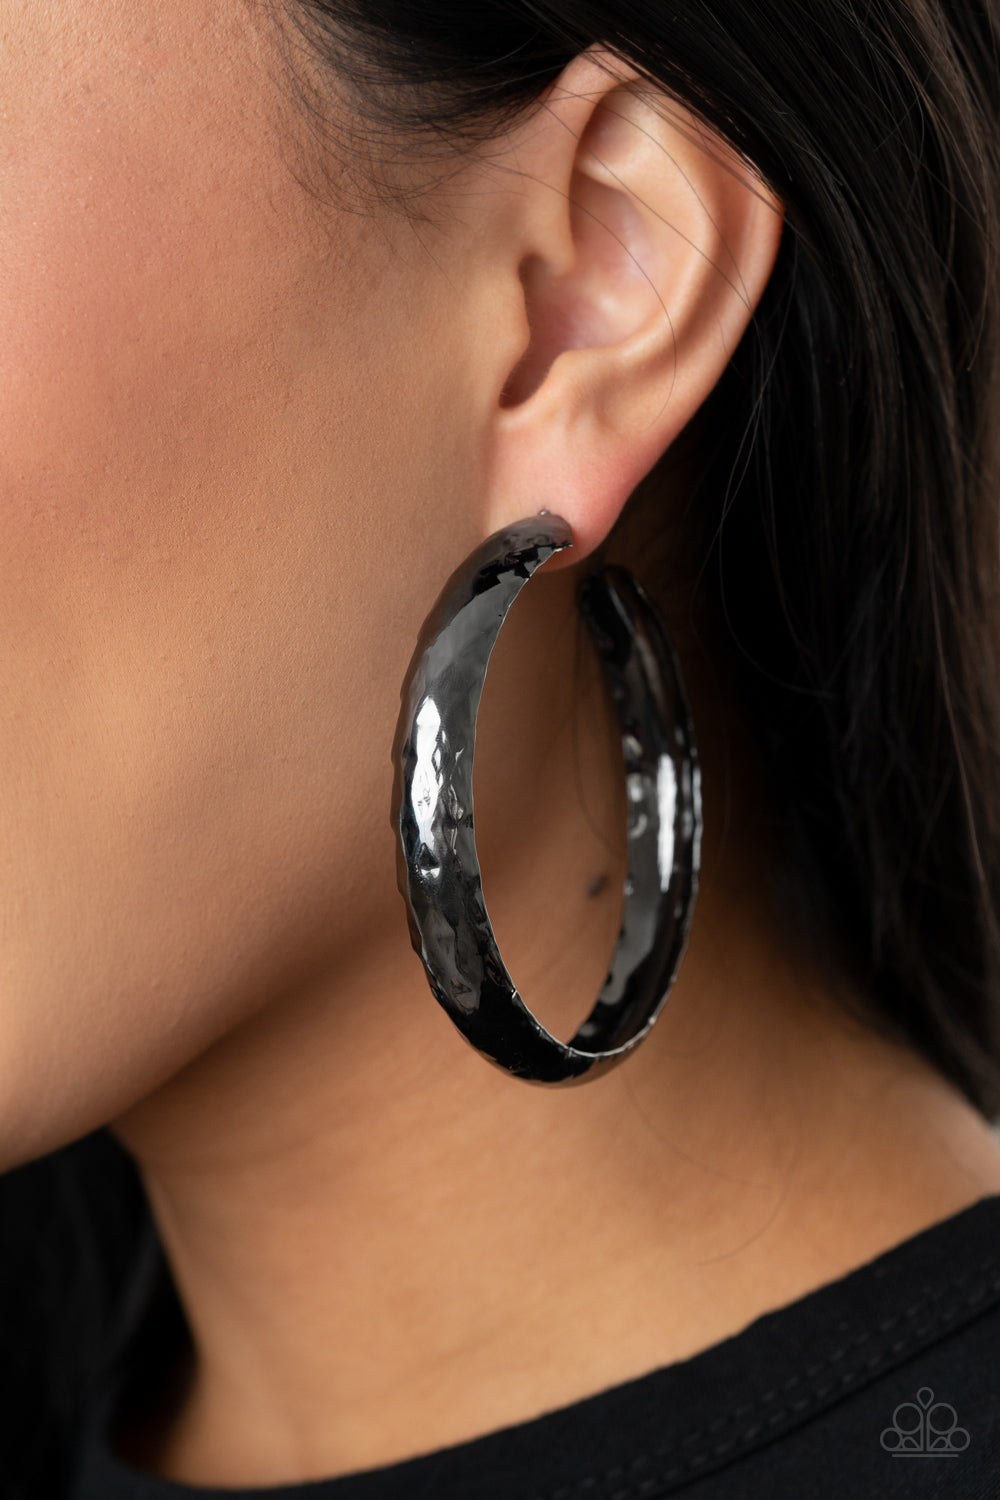 Paparazzi Check Out These Curves - Black Earrings - A Finishing Touch 